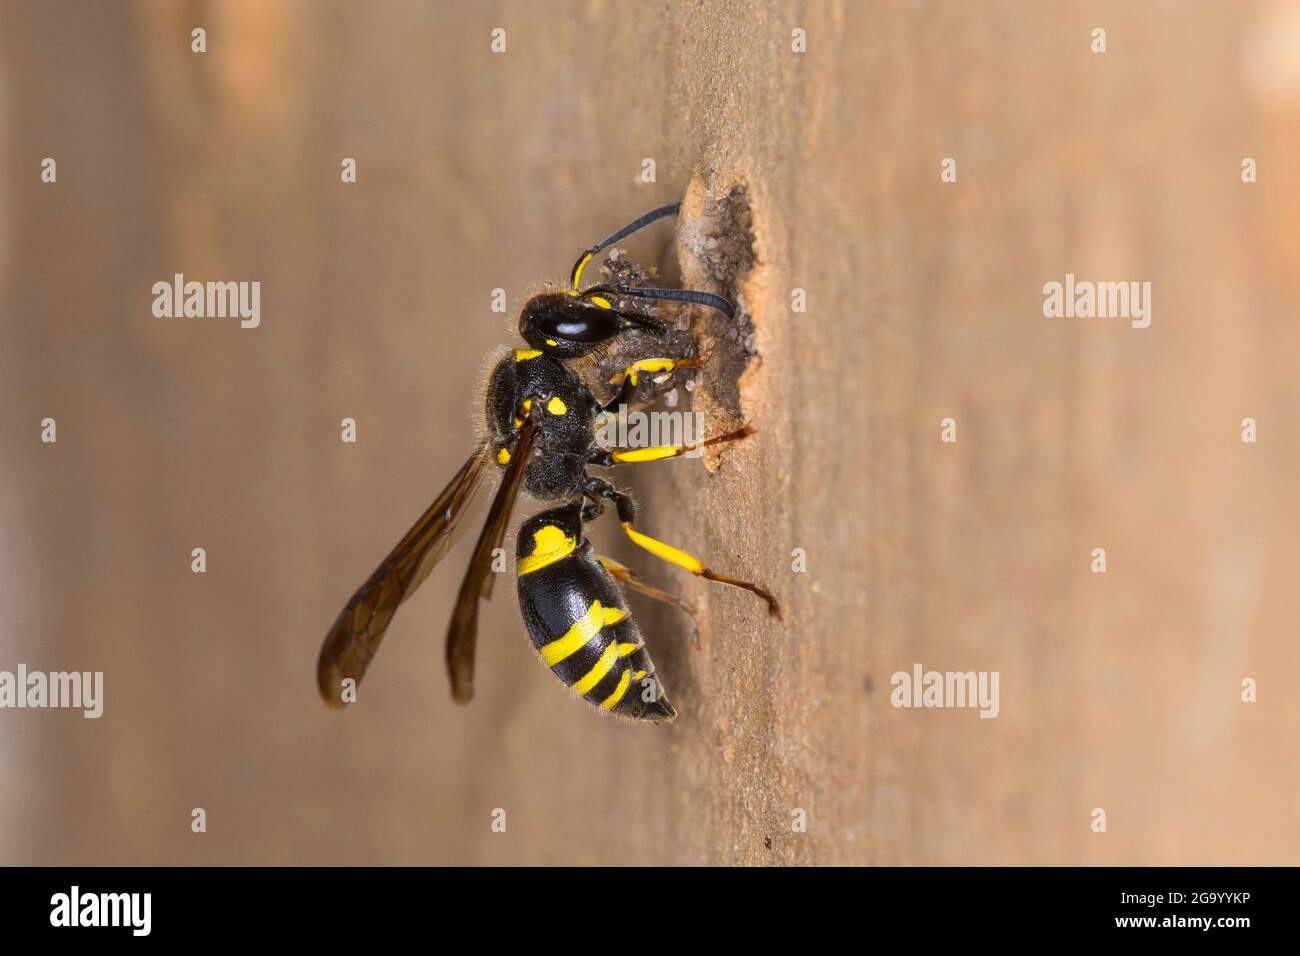 Potter wasp (Ancistrocerus nigricornis), female seals nesting tube with clay, Germany Stock Photo